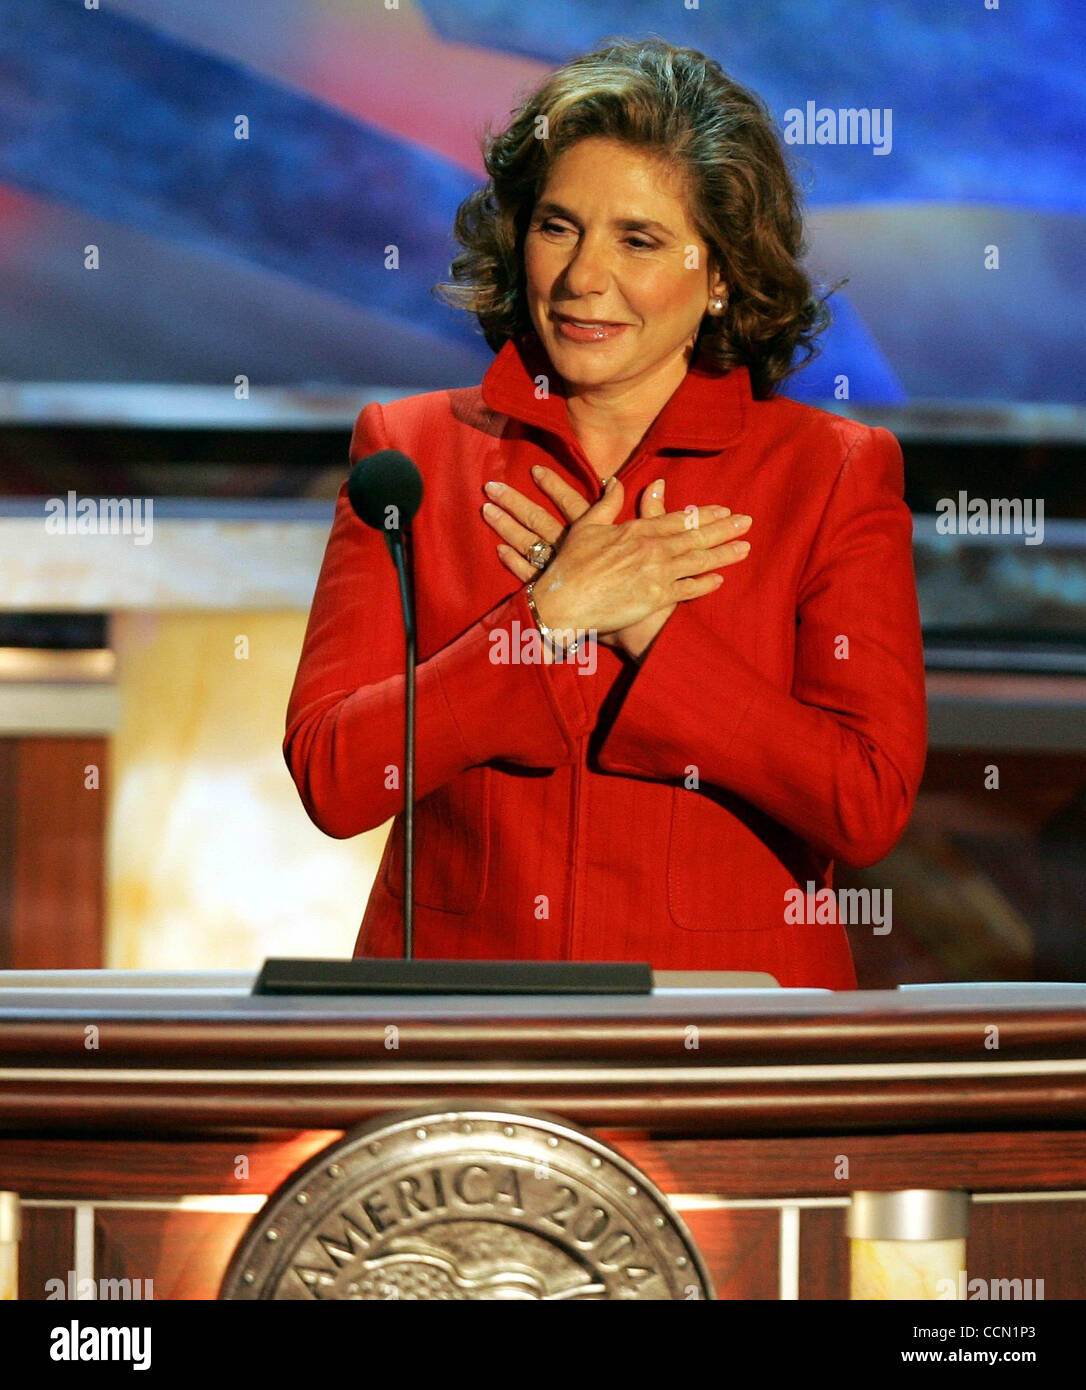 Photo by Richard Graulich/Cox News Service (The Palm Beach Post)  slug: COX-DEM-MAIN27 BOSTON, MA .. Teresa Heinz Kennedy, wife of presumptive democratic presidential nominee John Kerry, at her appearance at the  2004 Democratic National Convention Tuesday night in Boston.   (Photo by Richard Grauli Stock Photo